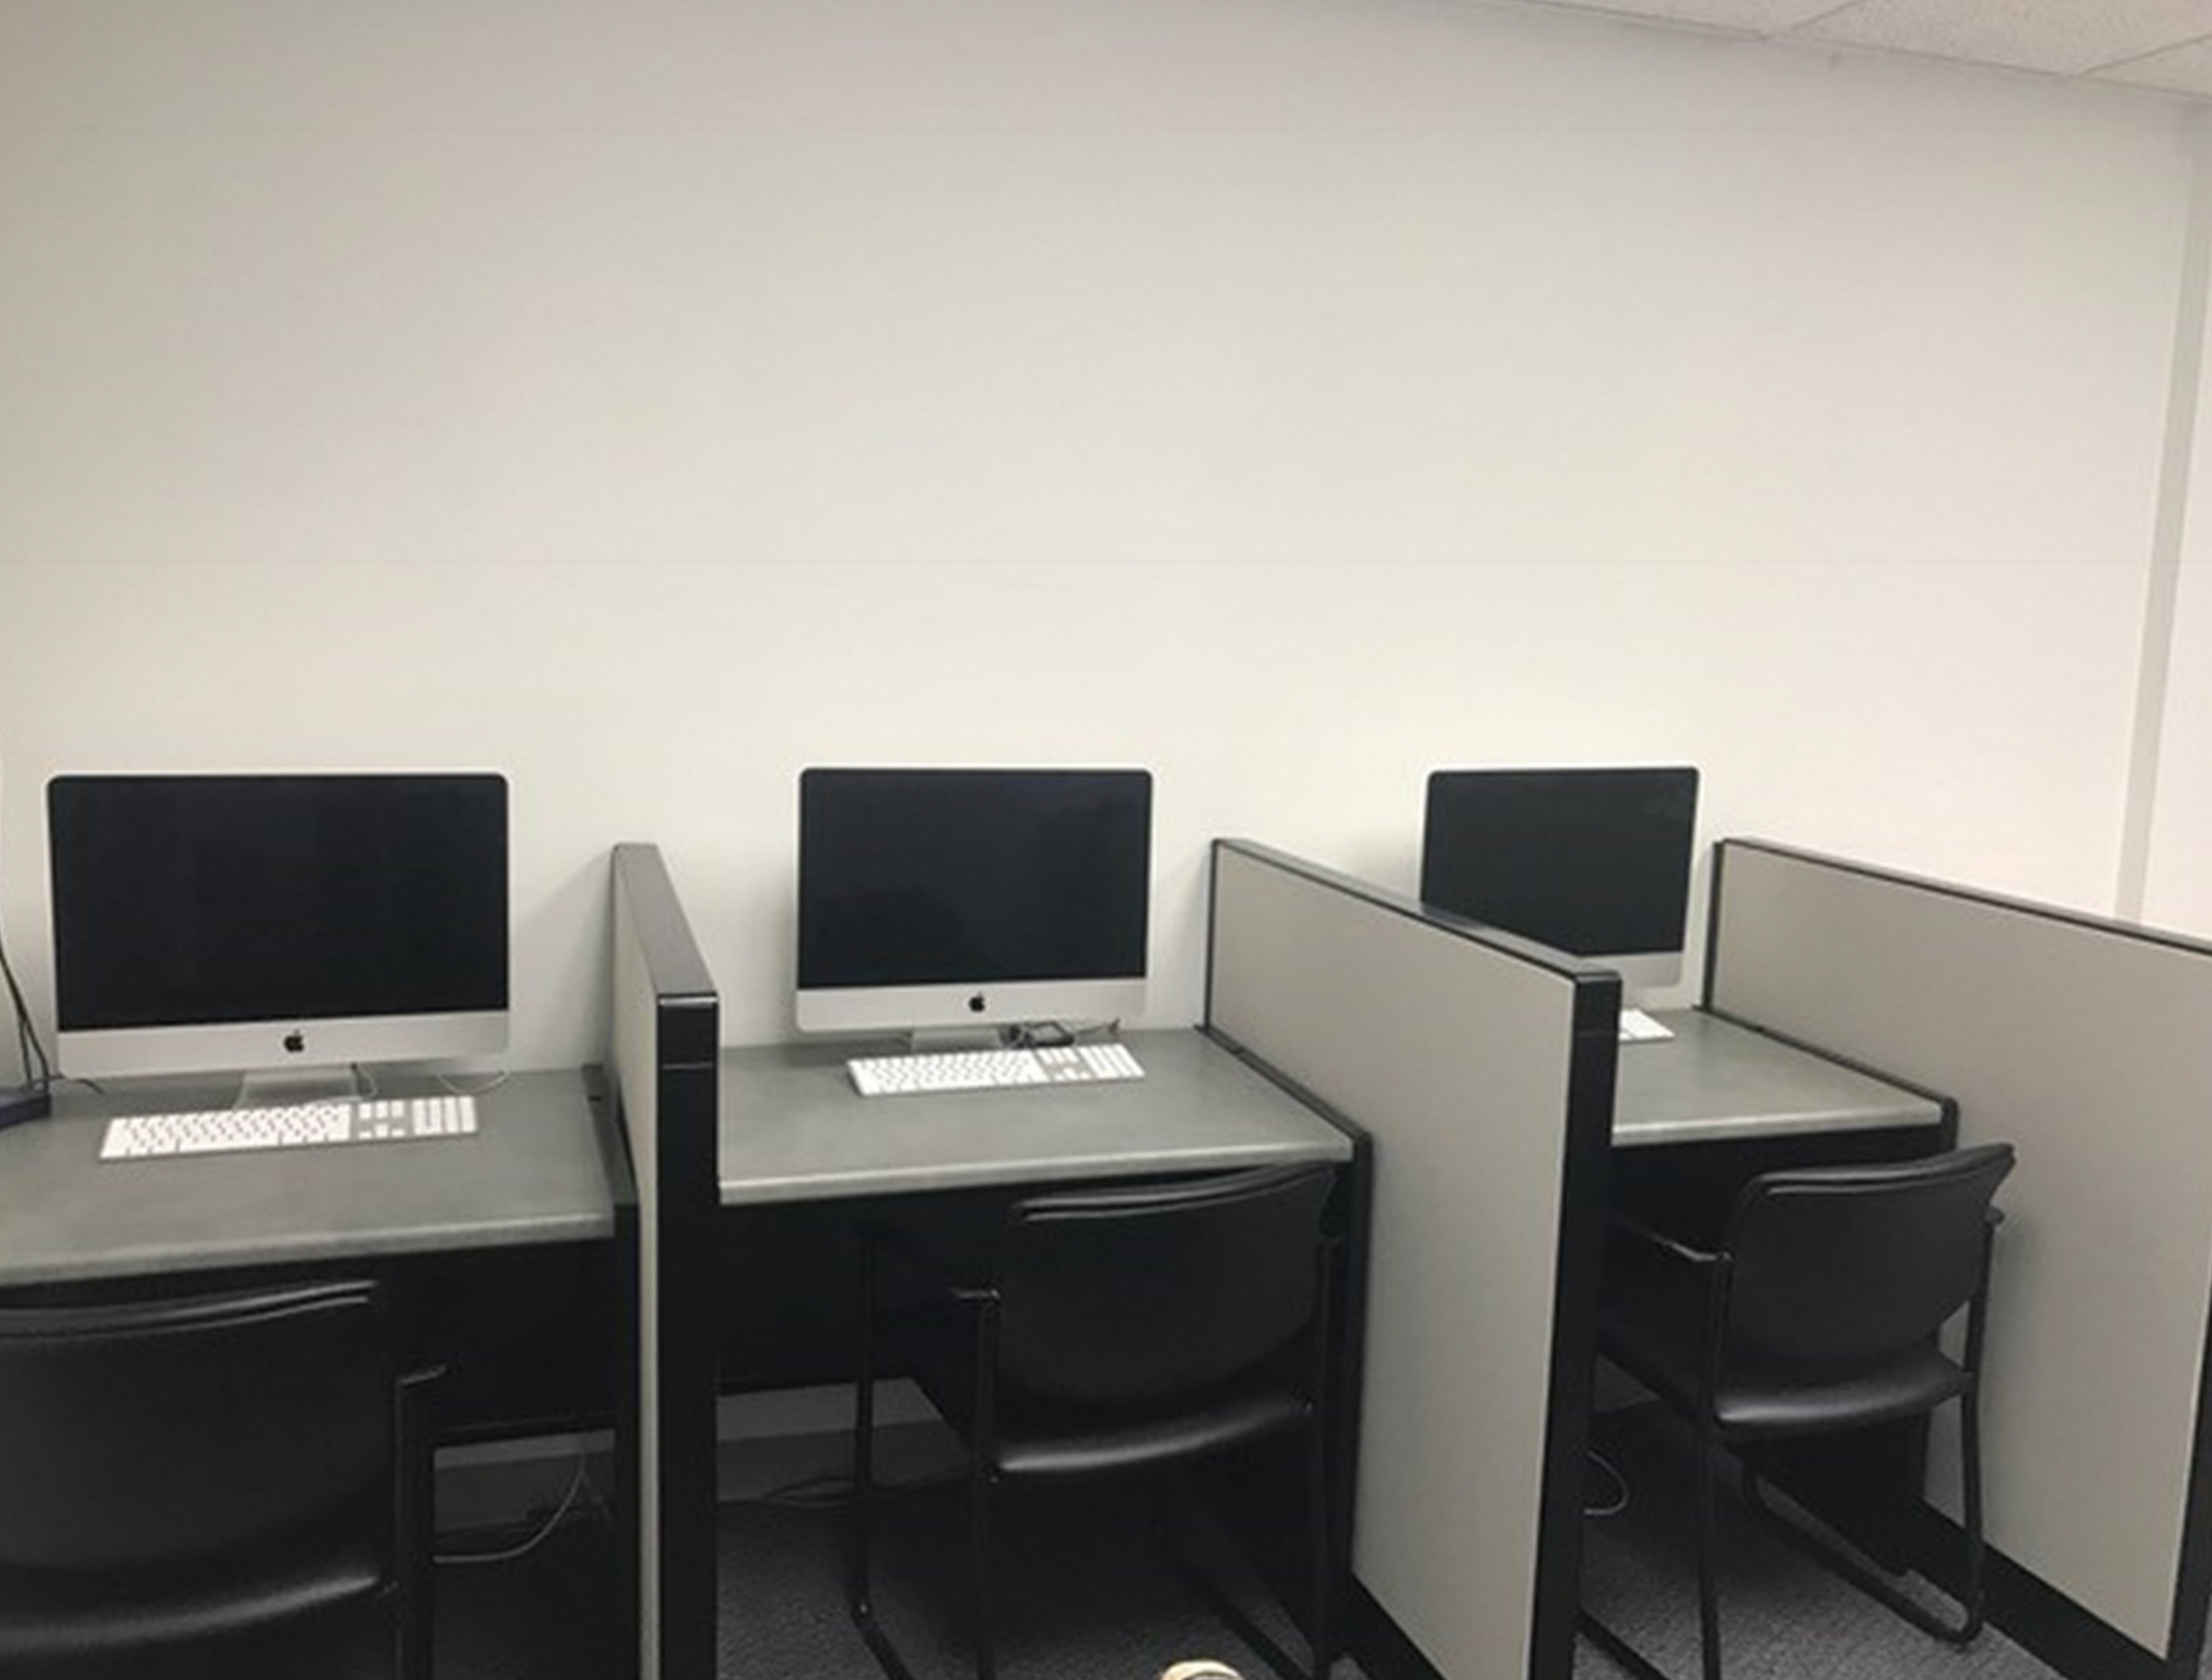 Computer lap with three iMac stations